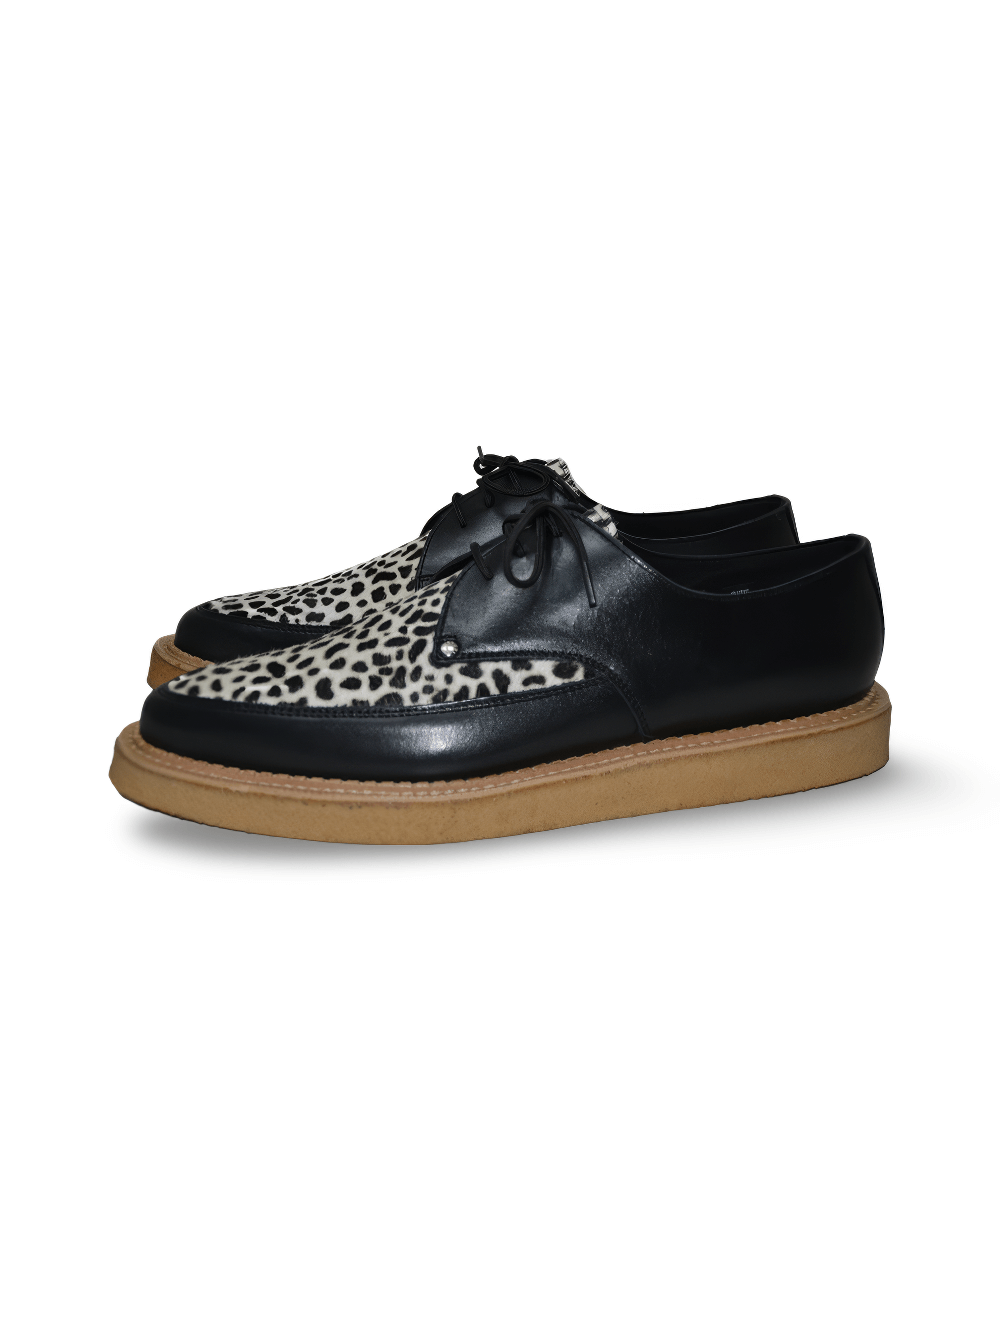 Black Leopard Pointed Creepers Shoes with Crepe Sole